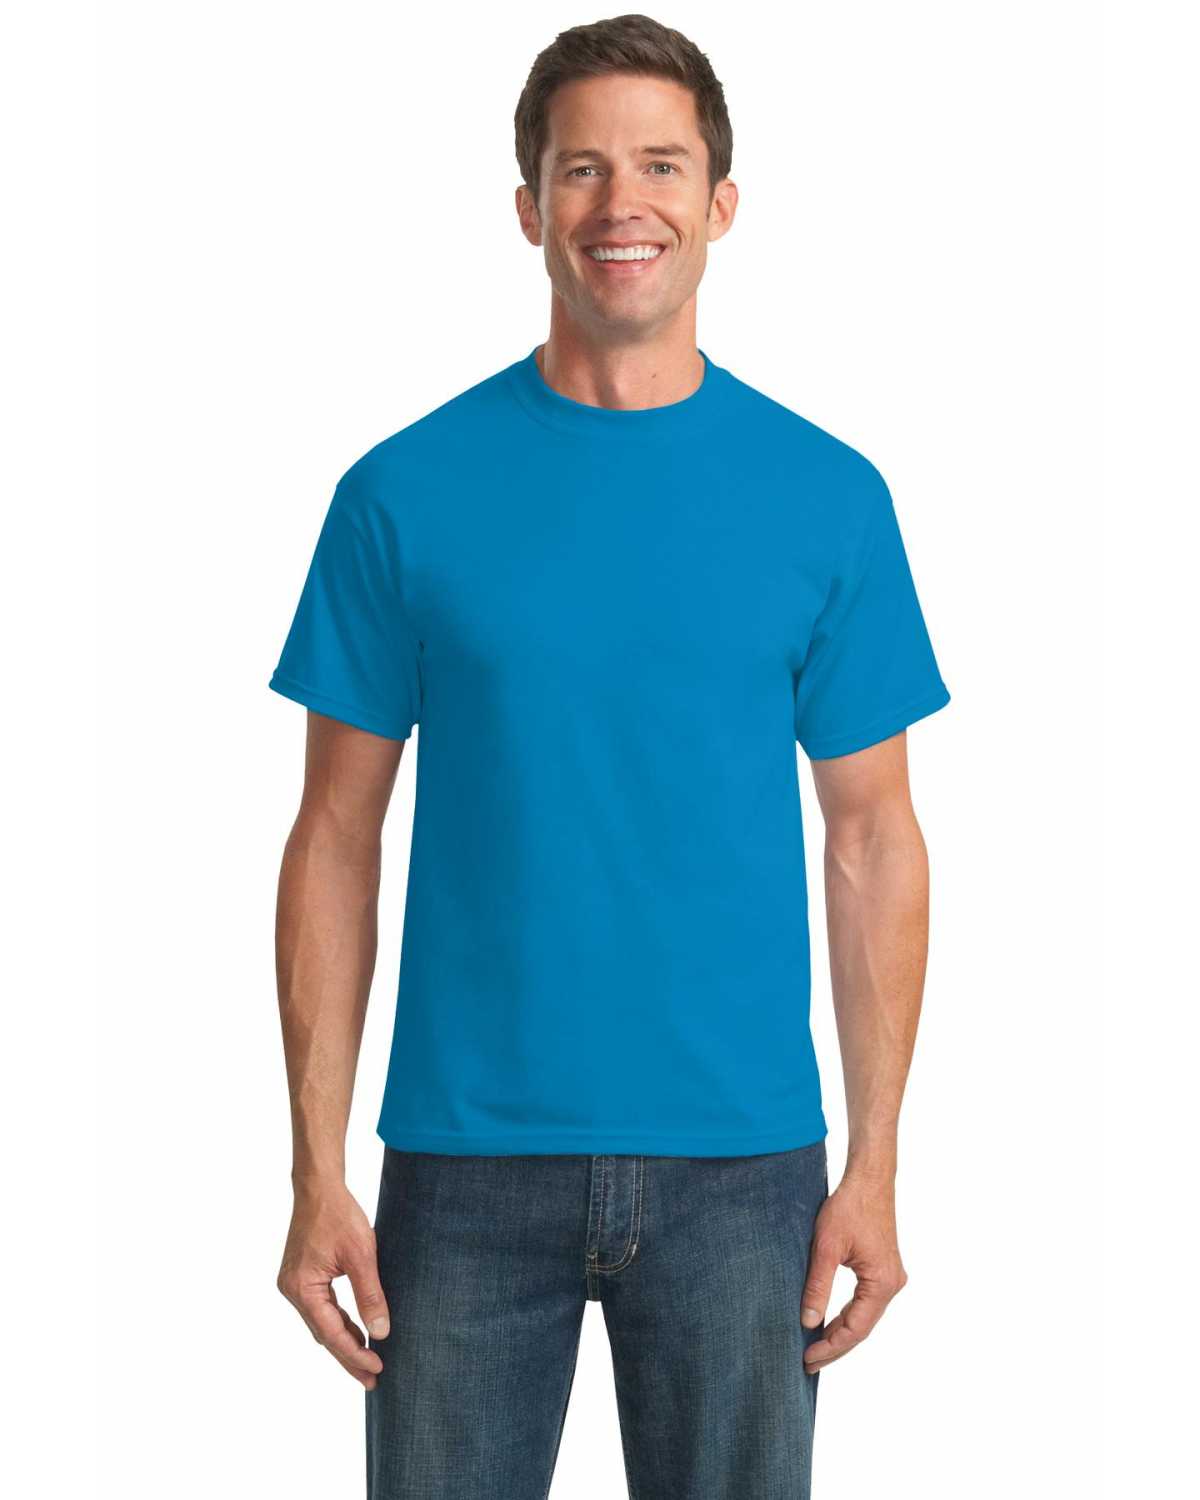 Port & Company PC55T Tall Core Blend Tee on discount | ApparelChoice.com